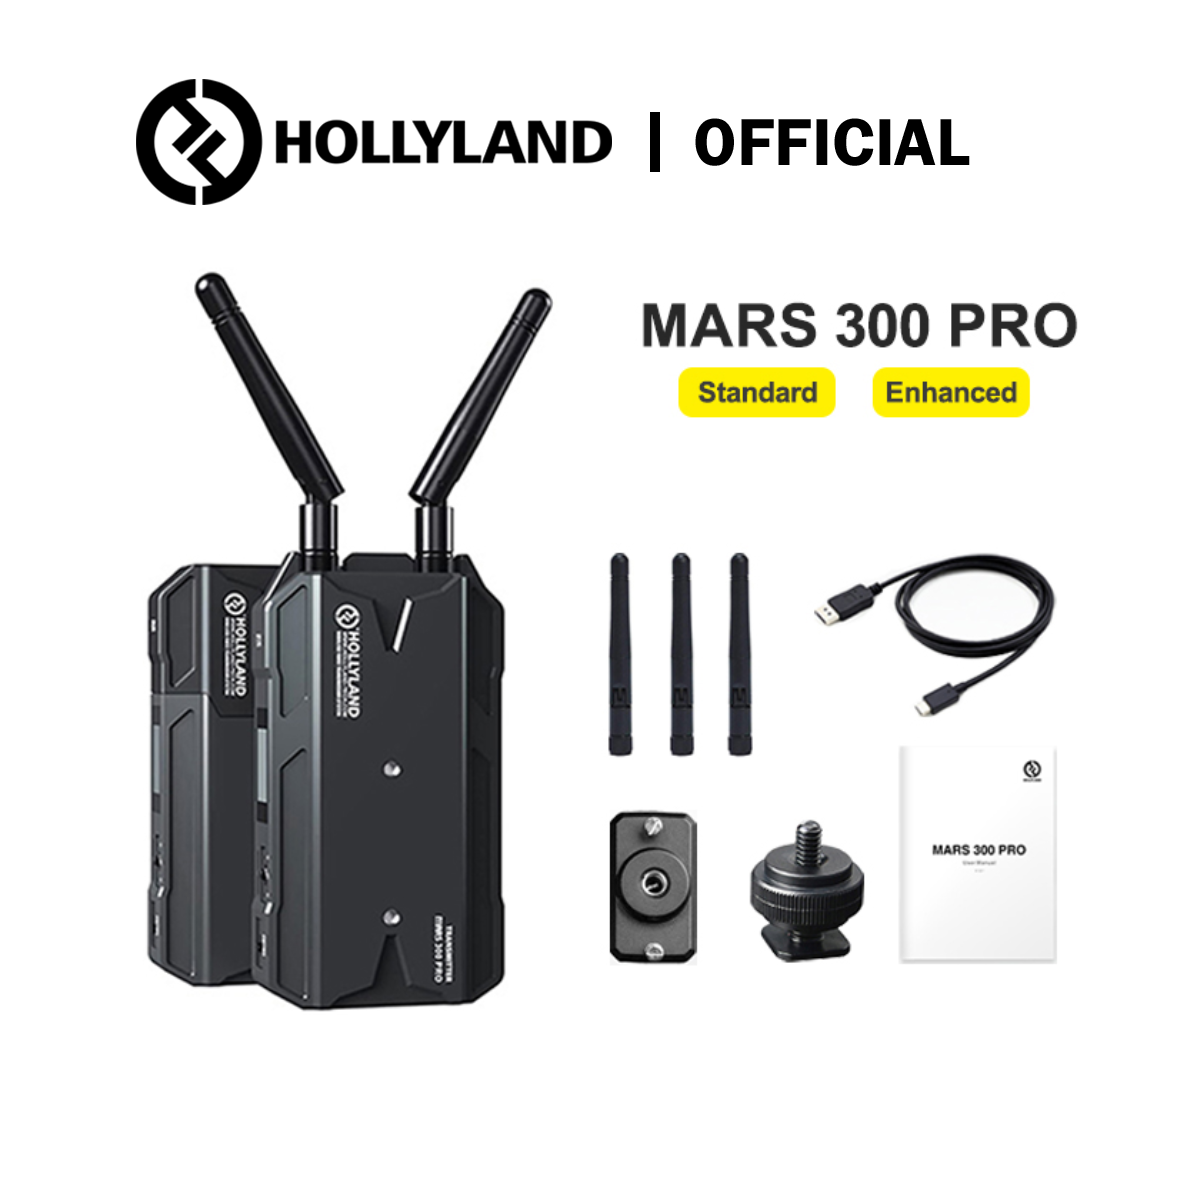  Hollyland Mars 400S [Official] Wireless SDI/HDMI Wireless Video  Transmitter and Receiver-400ft Long Range 0.1s Low Latency, for  Videographer Photographer Filmmaker Cinematographer : Electronics